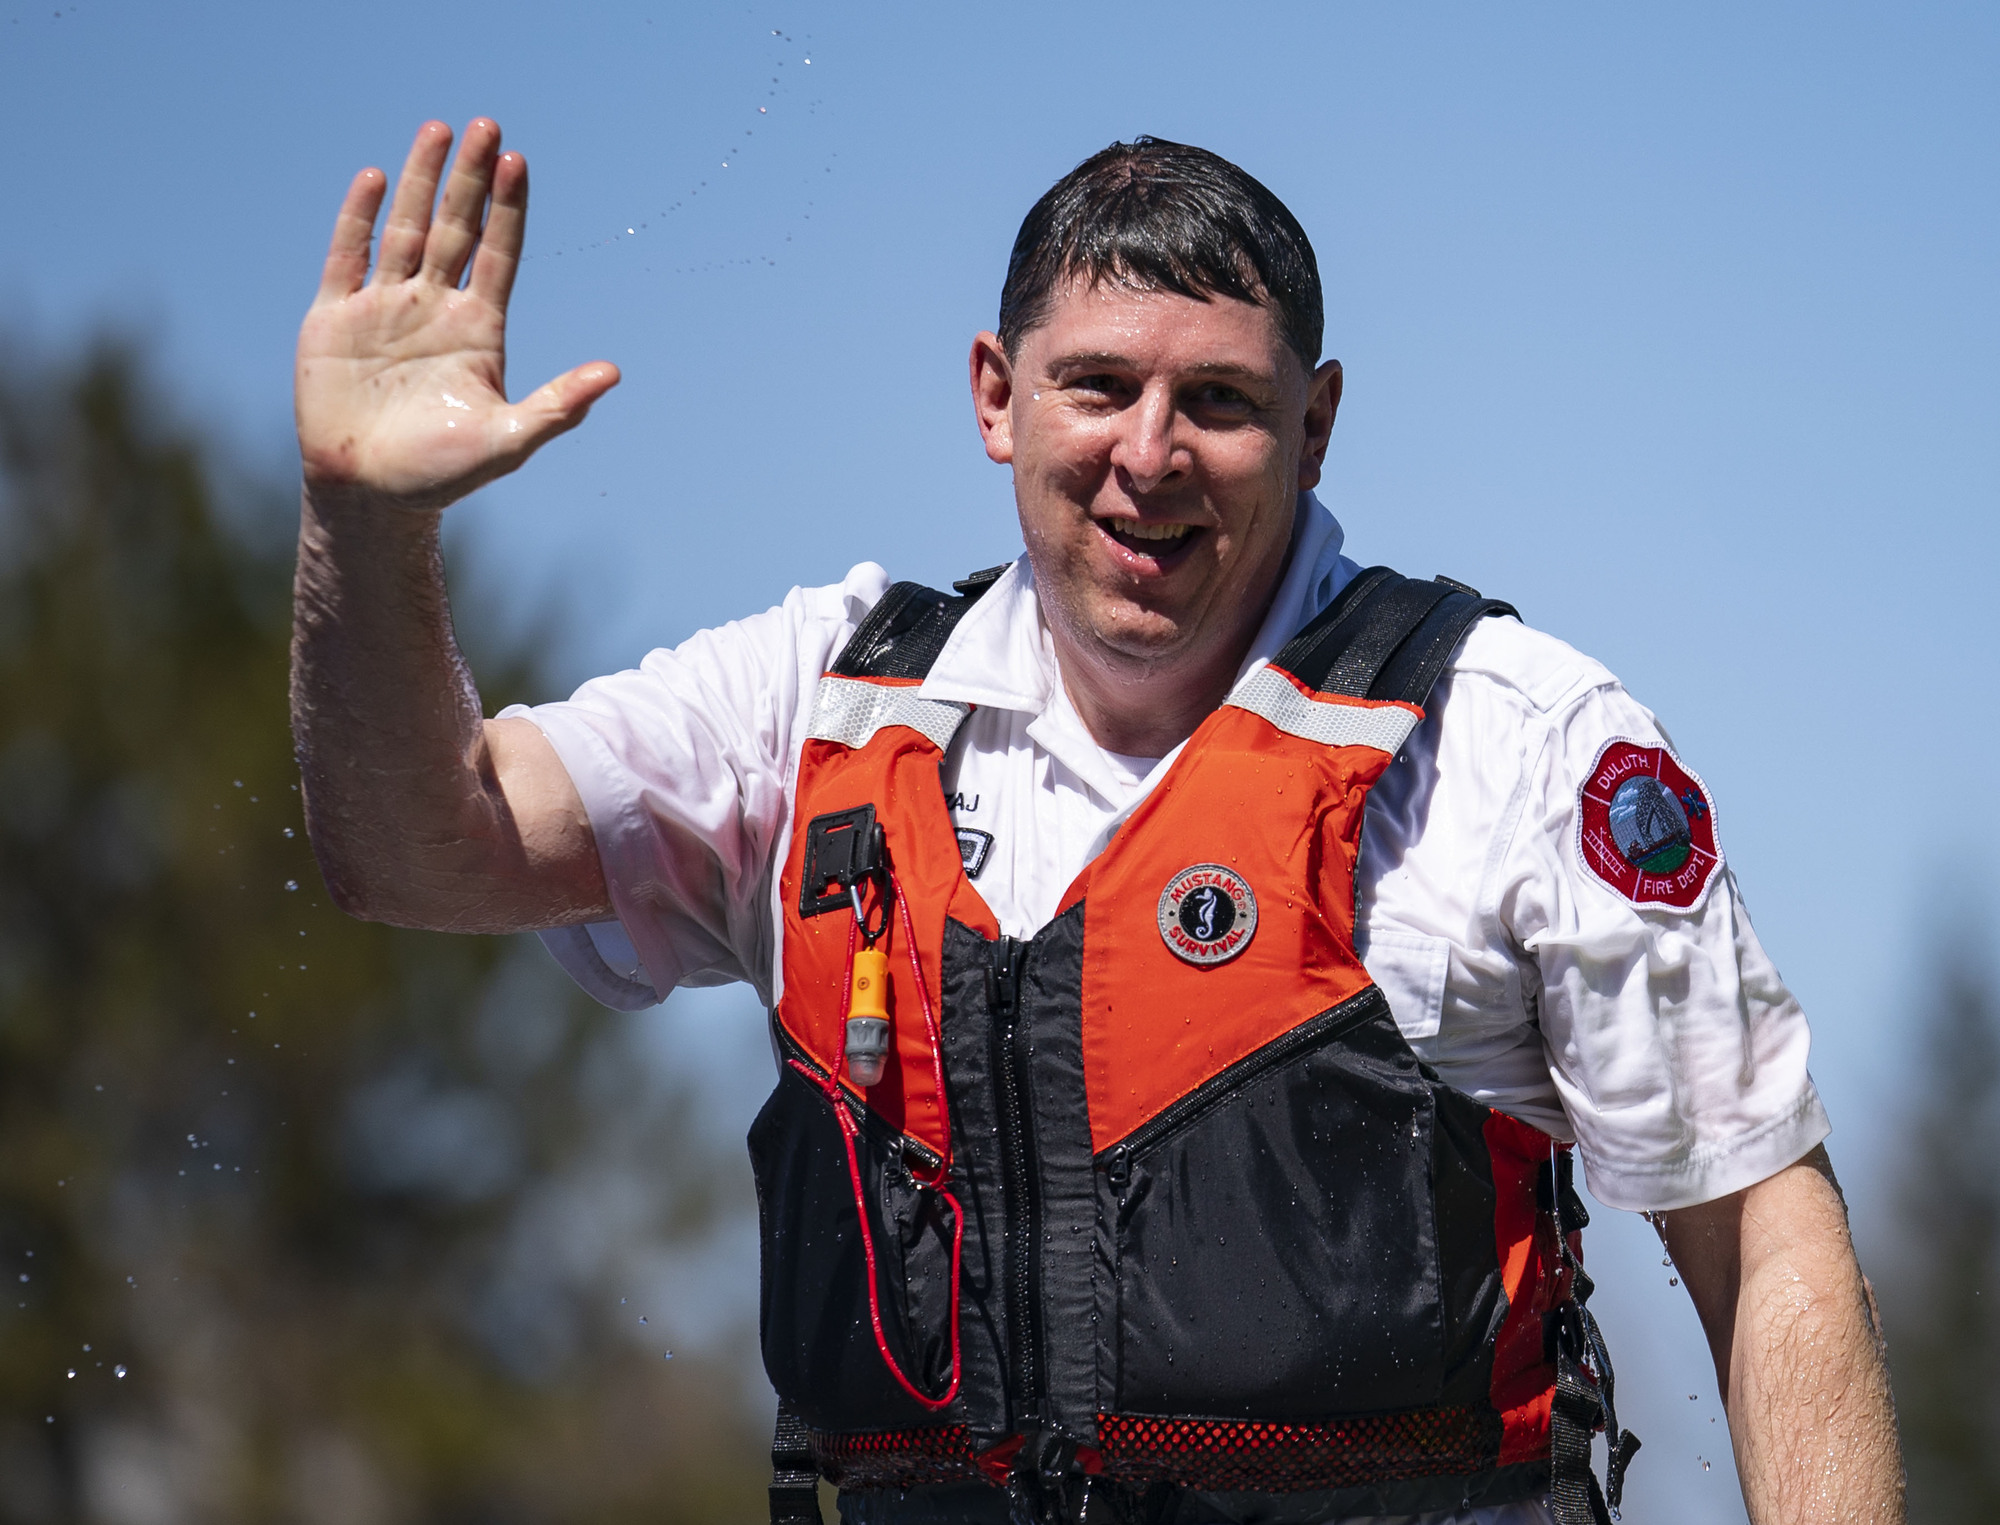 Fire Chief Shawn Krizaj waved to bystanders as he warmed up after jumping into Lake Superior.